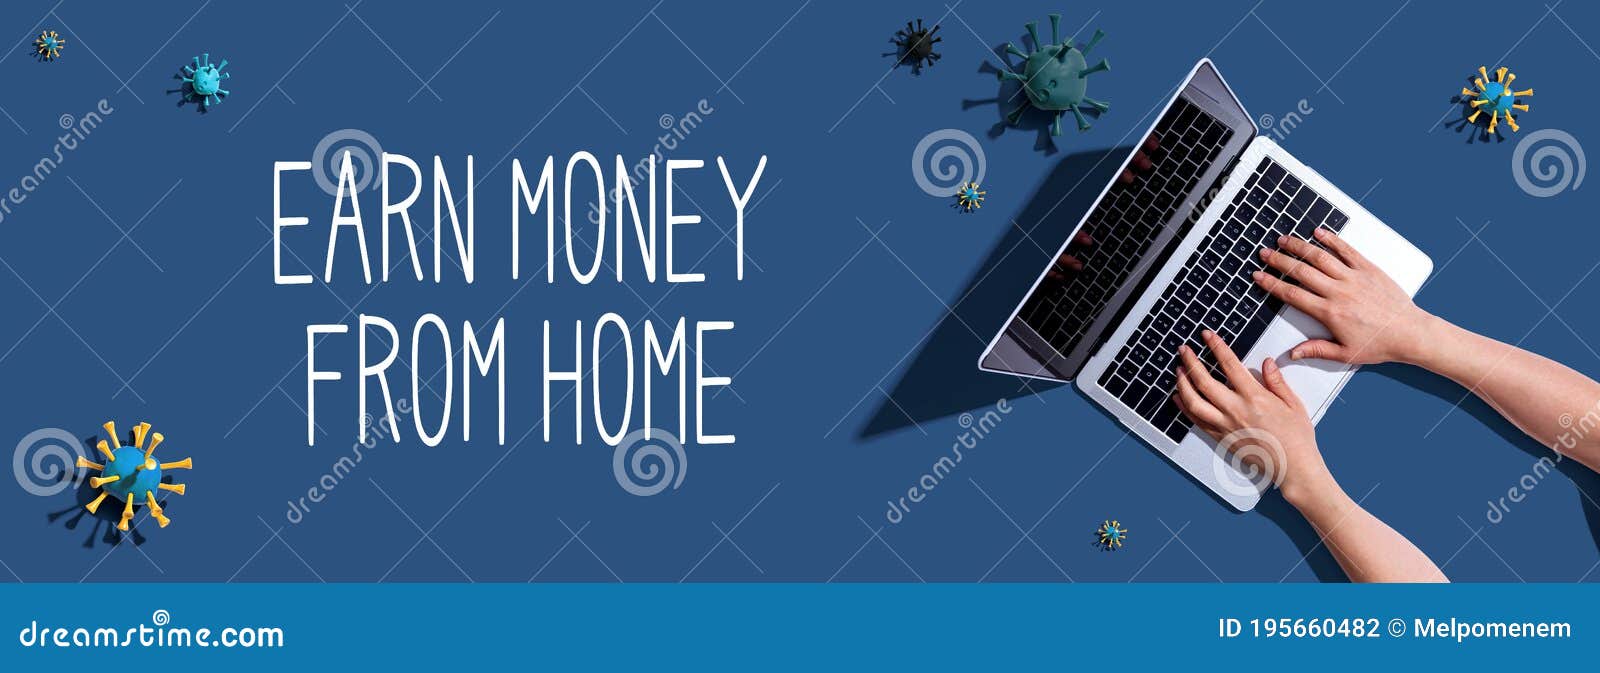 Earn Money From Home With Woman Using A Laptop Stock Photo Image Of